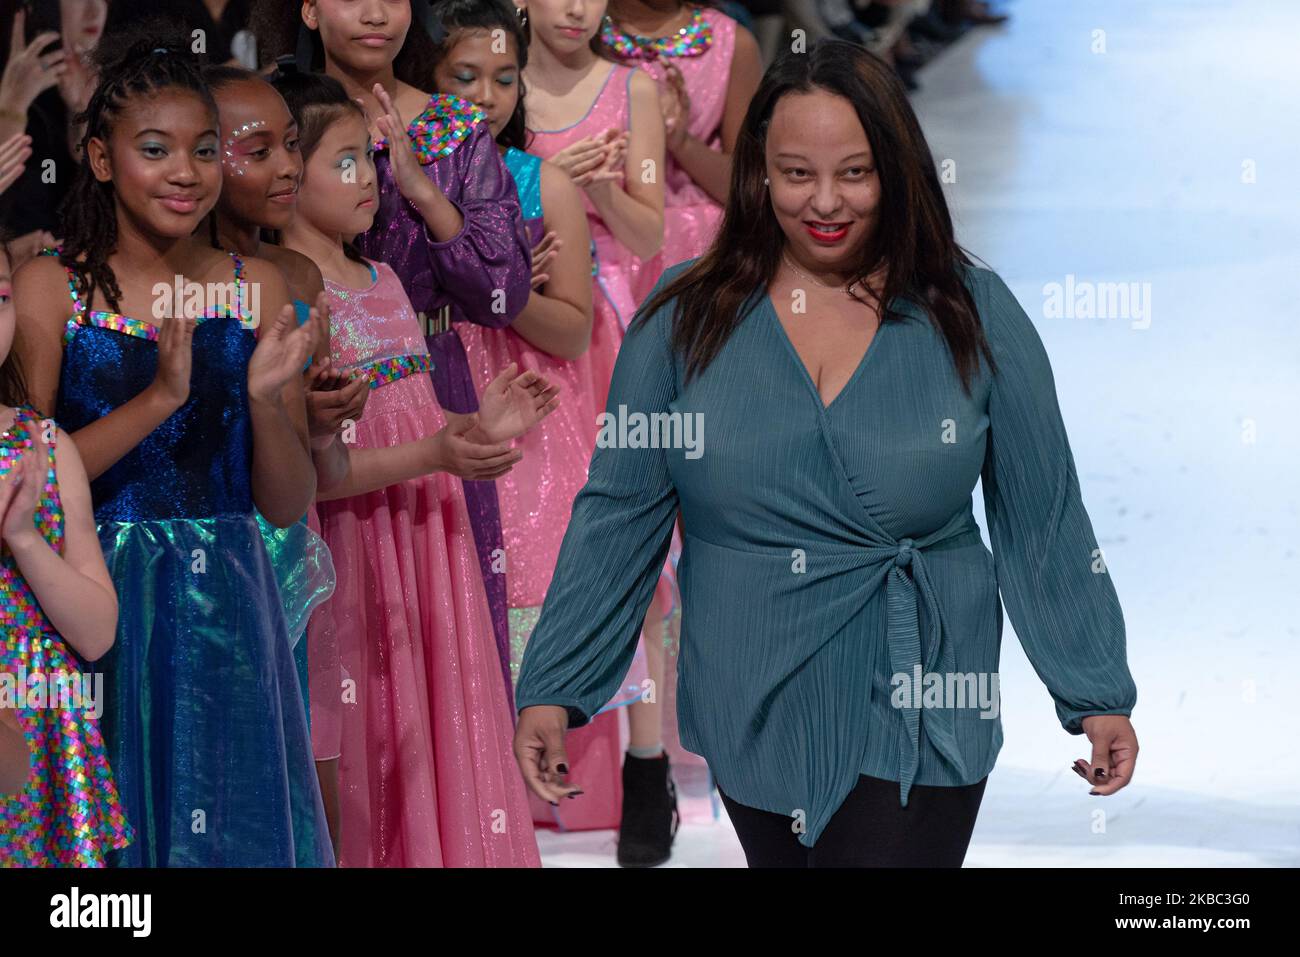 Designer after the runway of the Young Socialites collection for Spring and Summer 2020 during the third annual Toronto Kids Fashion Week fashion show on November 30, 2019 in Toronto, Canada (Photo by Anatoliy Cherkasov/NurPhoto) Stock Photo